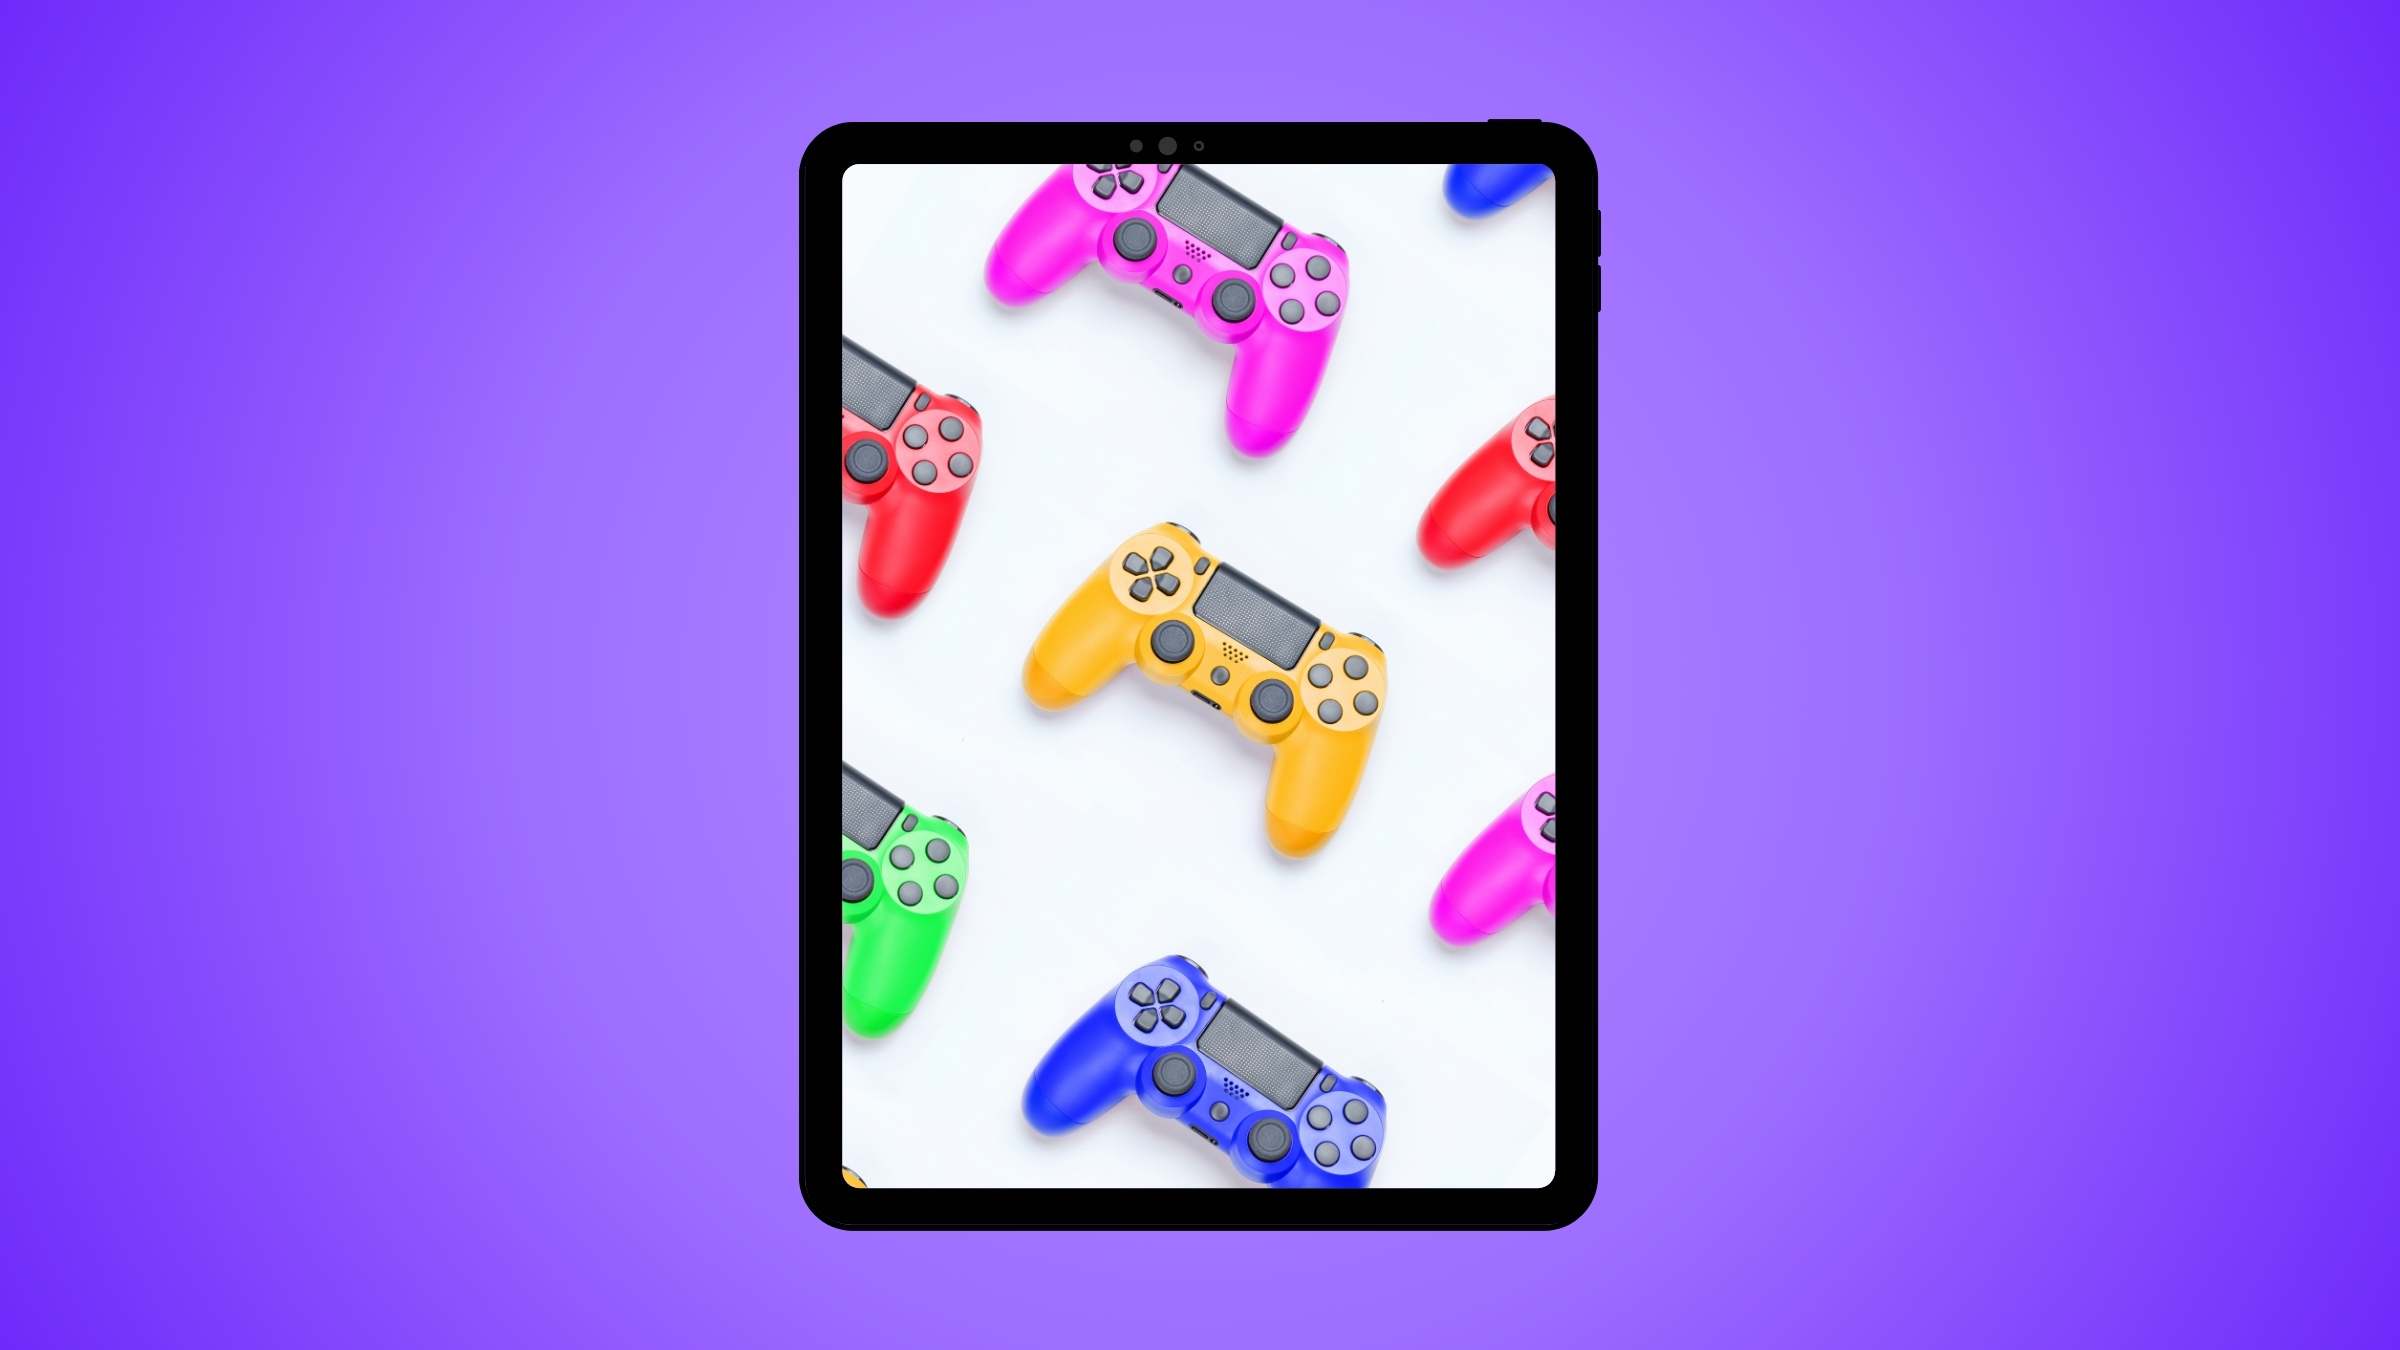 iphone vs ipad for gaming. Are ipads good for gaming? which are the best ipads for gaming? find out